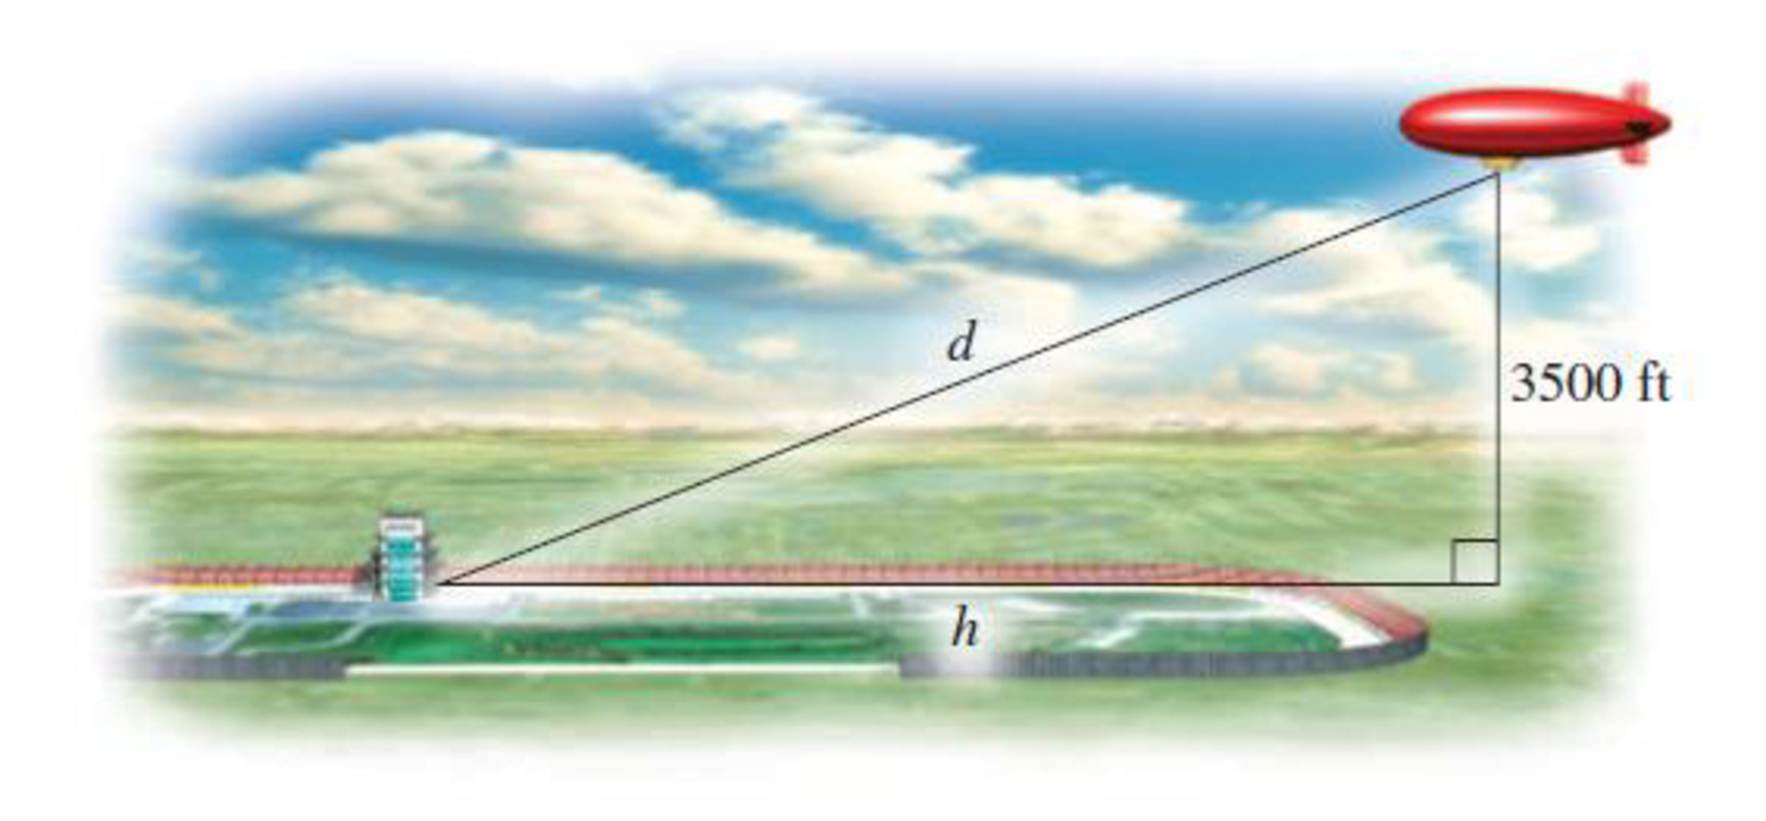 Chapter 2.1, Problem 35E, Blimp Distance. The Goodyear Blimp can be seen flying at an altitude of 3500 ft above the Motor 